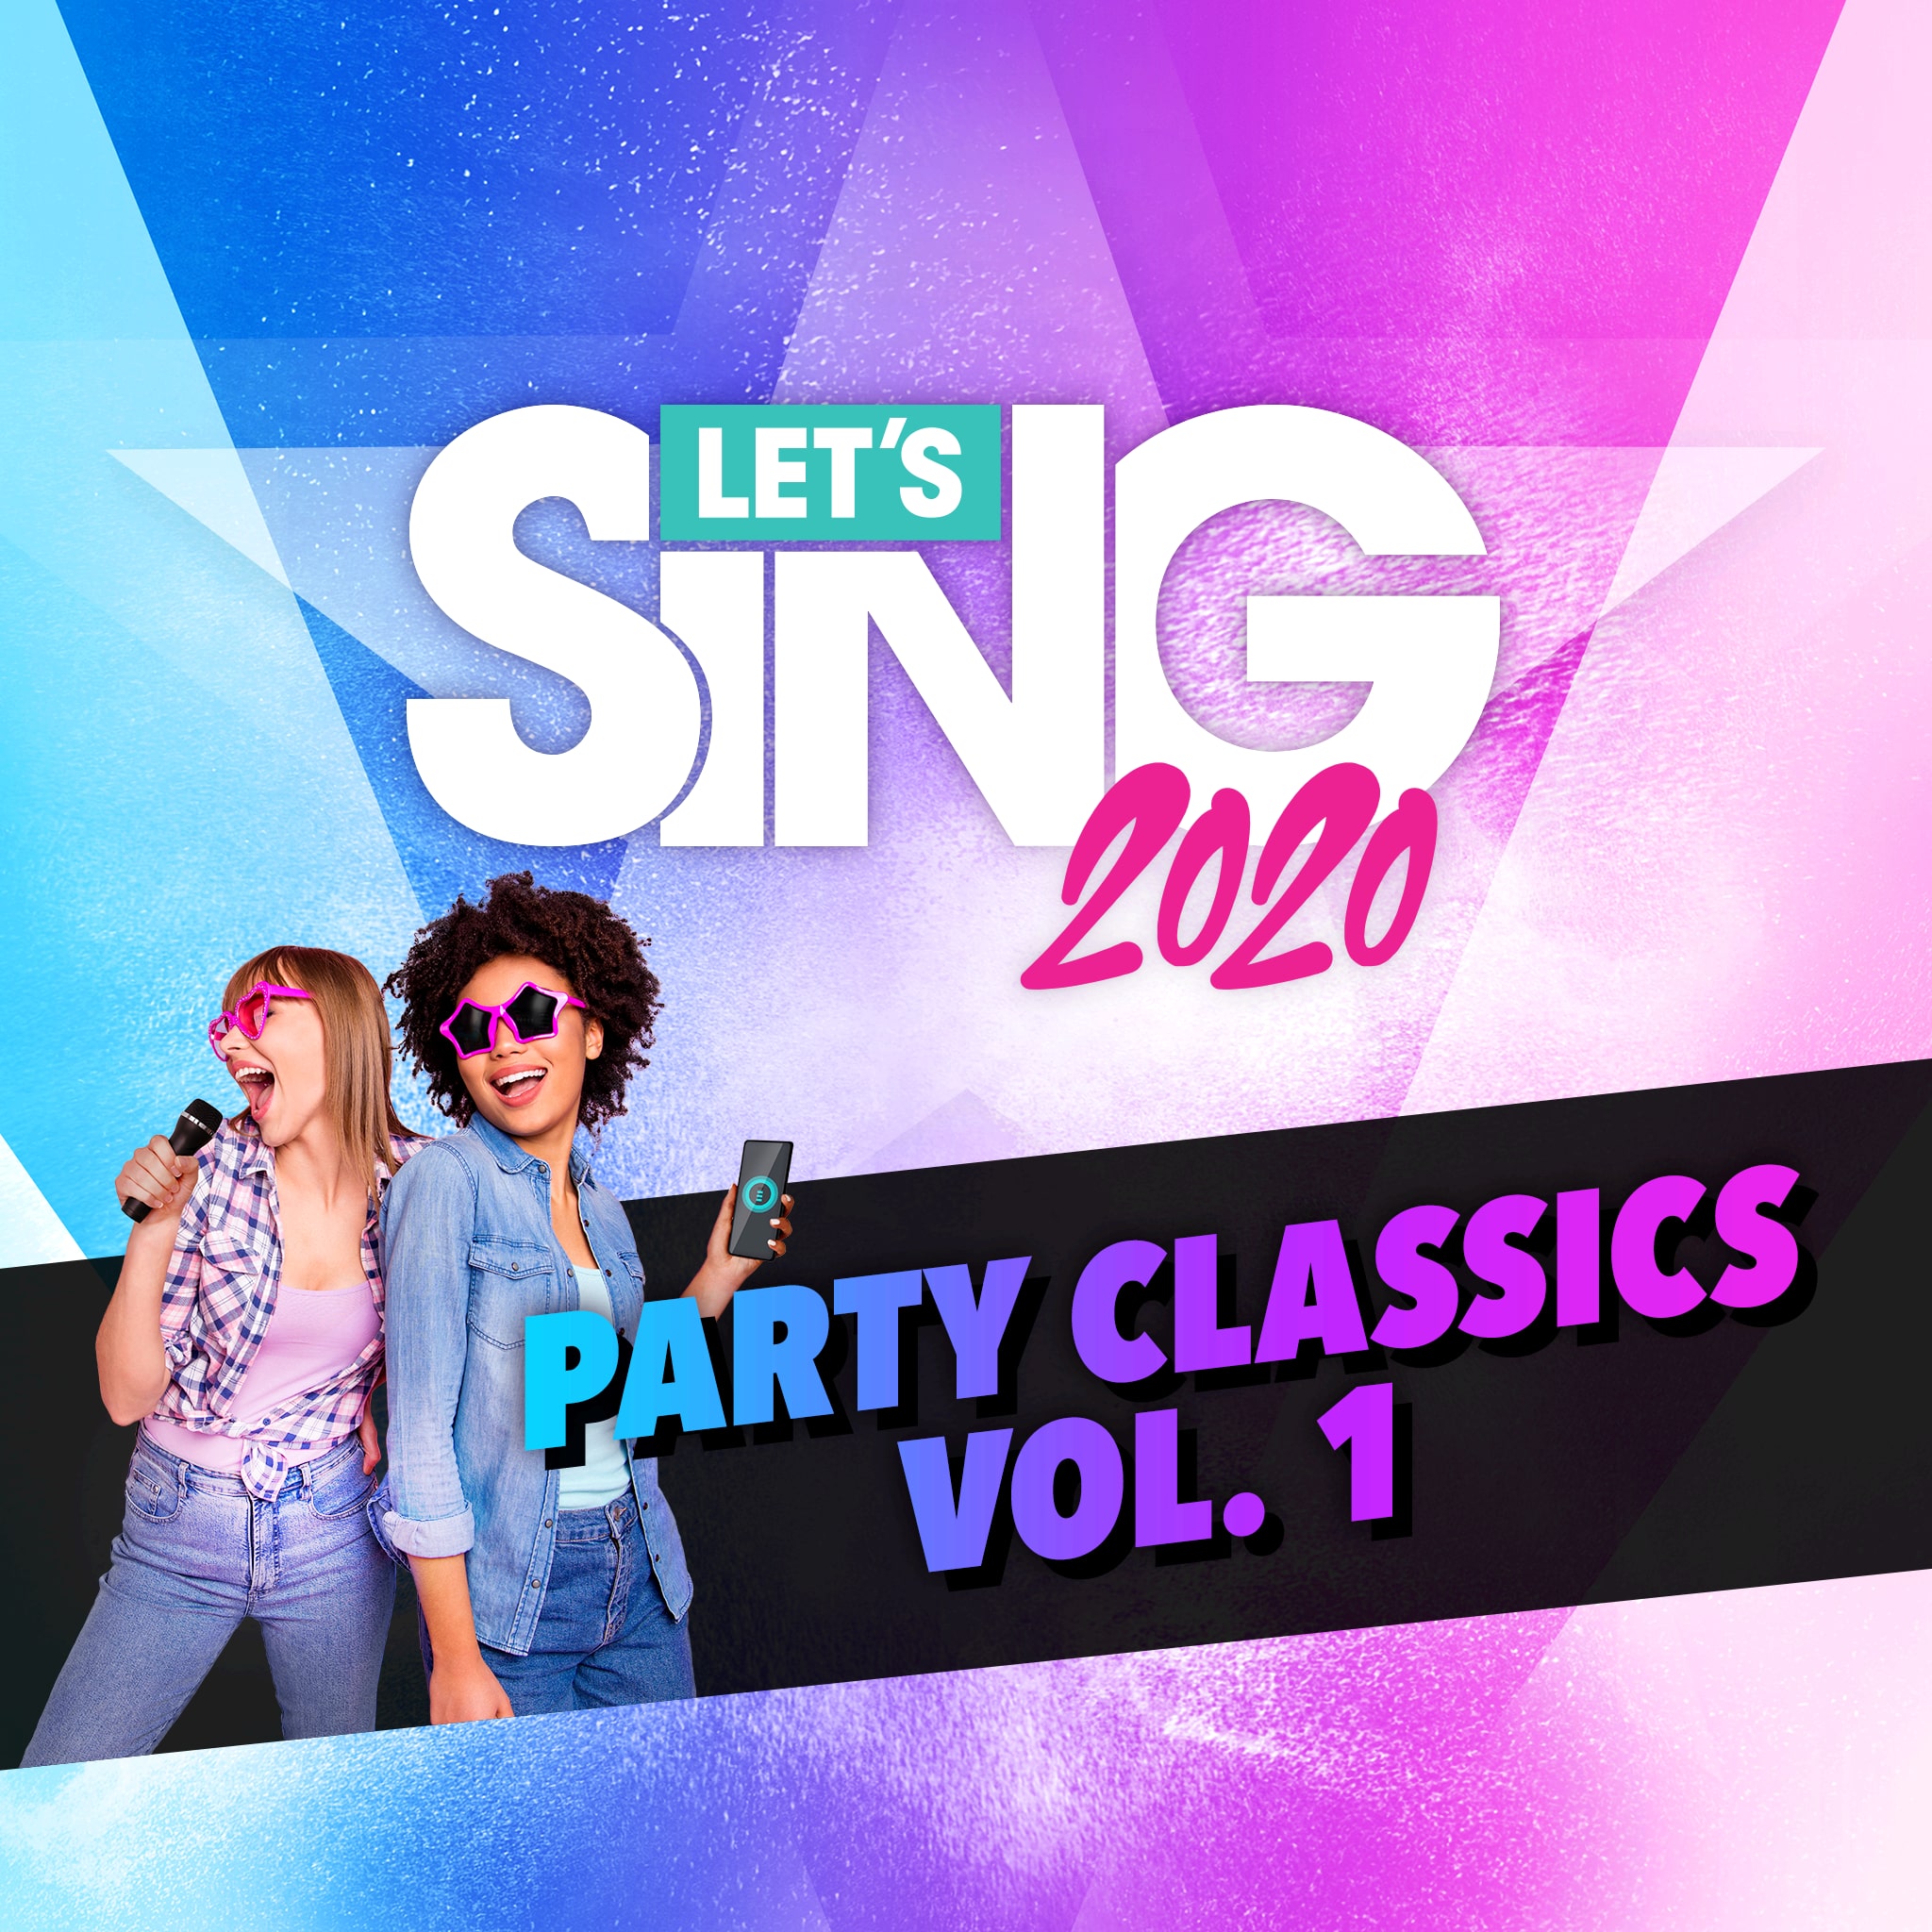 Let's Sing 2020 - Party Classics Vol. 1 Song Pack